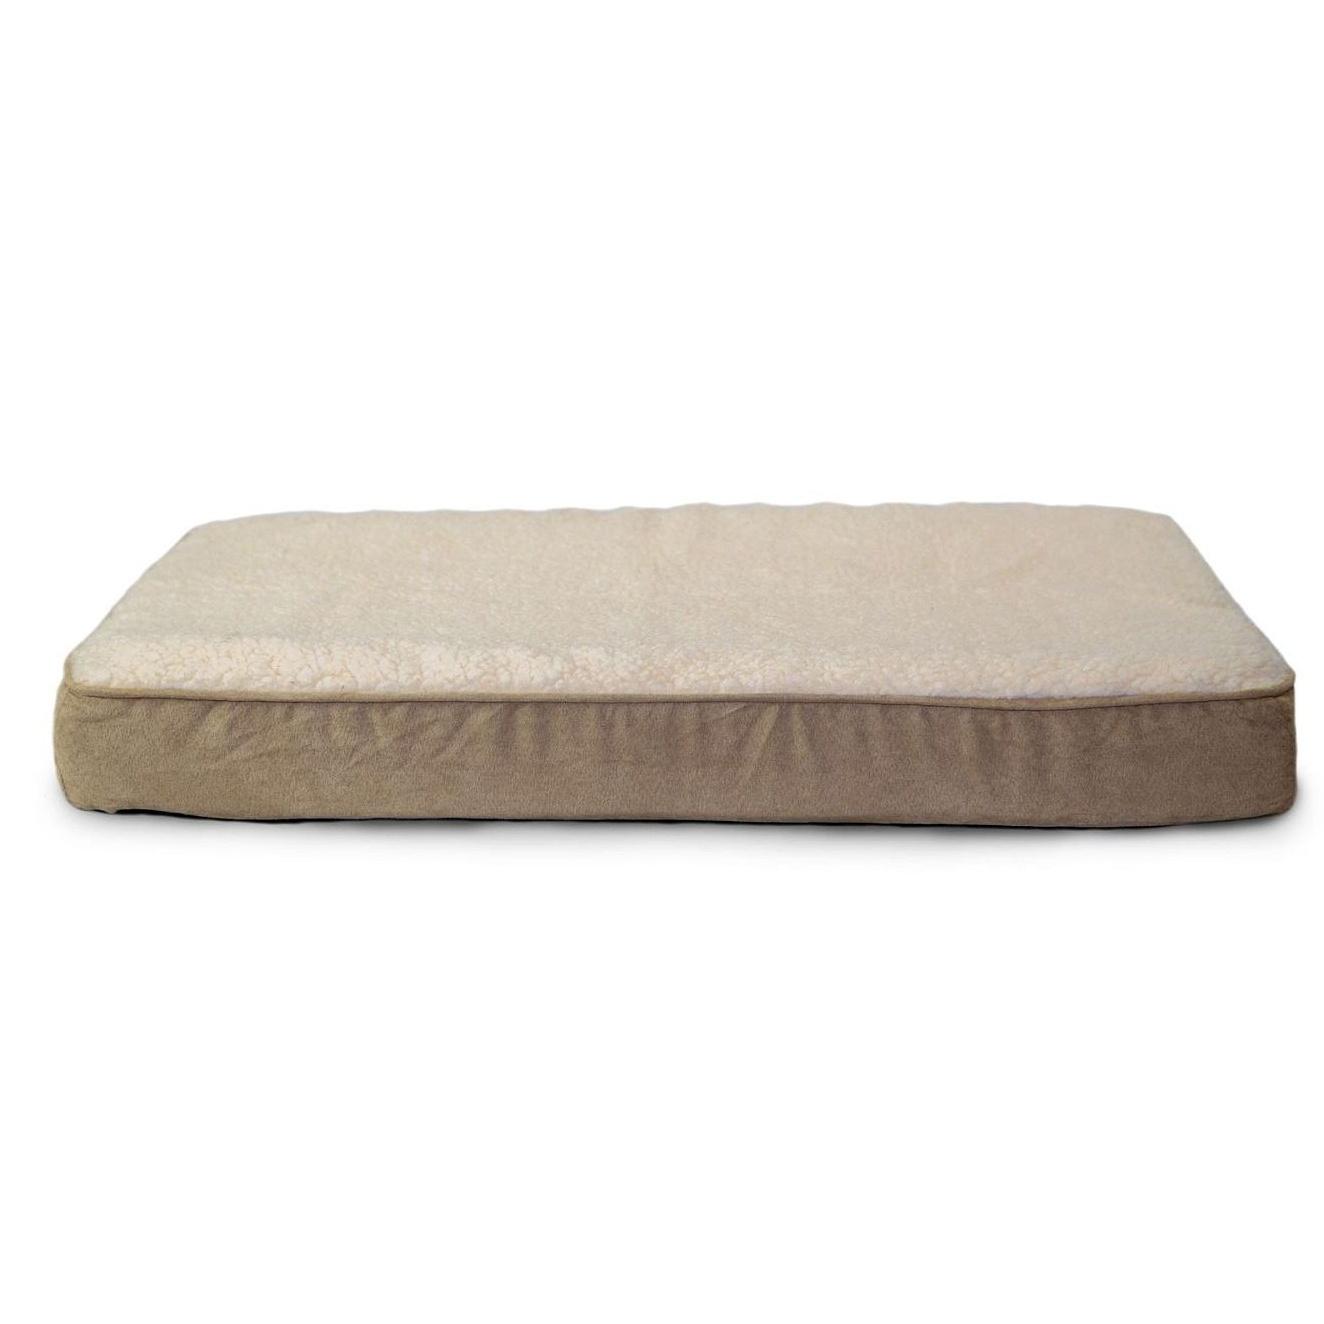 FurHaven Faux Sheepskin & Suede Deluxe Orthopedic Pet Bed - Clay